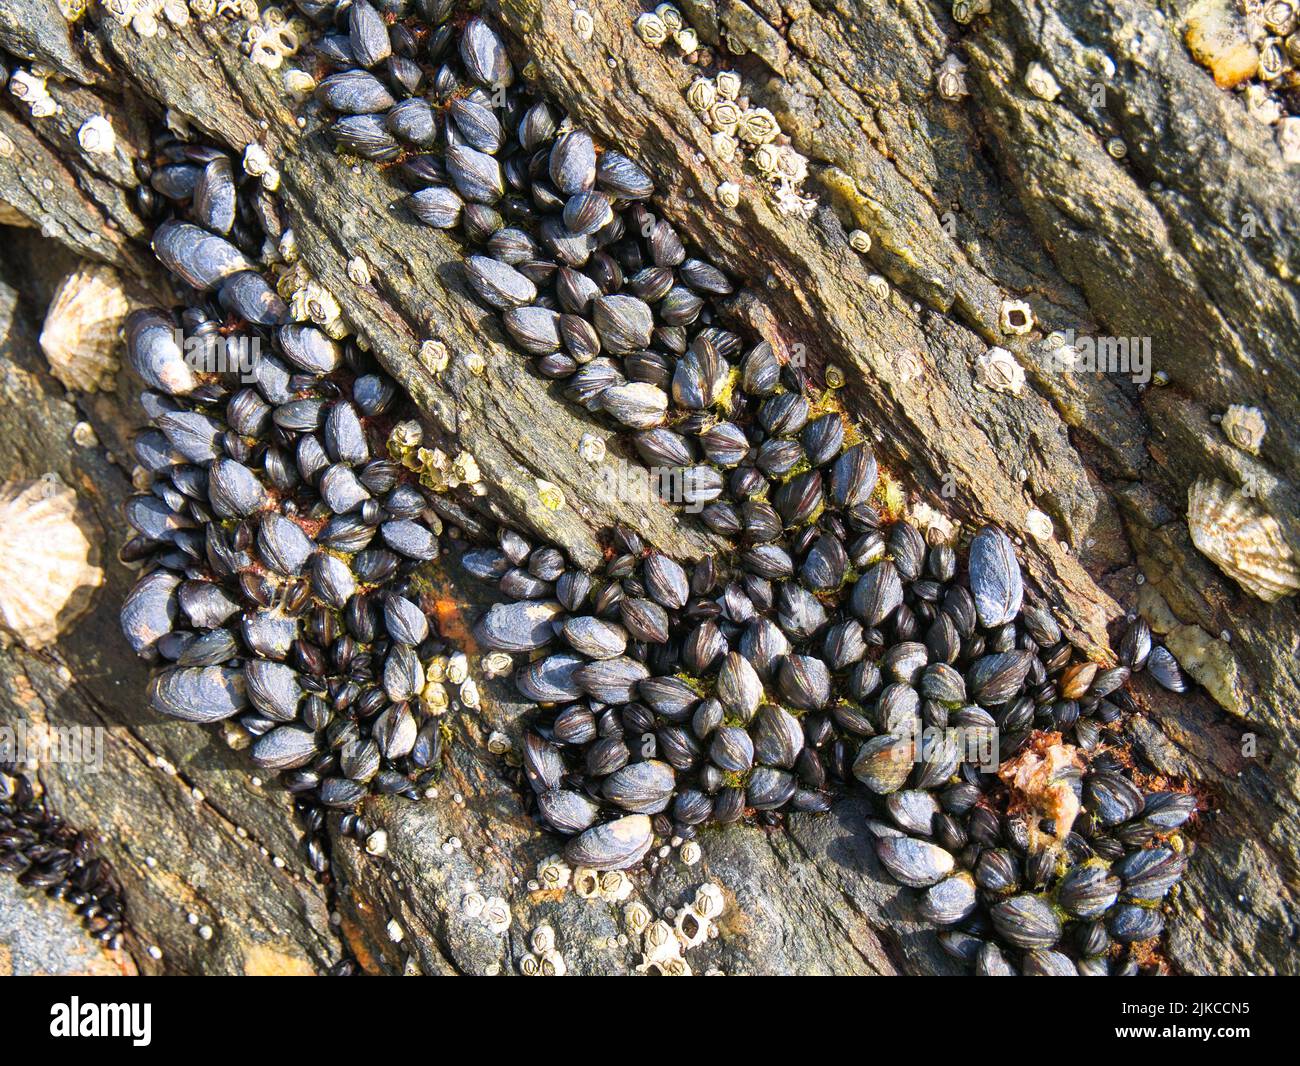 Many small wild mussels growing on a rock at Scousburgh (Spiggie) Beach in Shetland, UK. Taken at low tide on a sunny day. Stock Photo